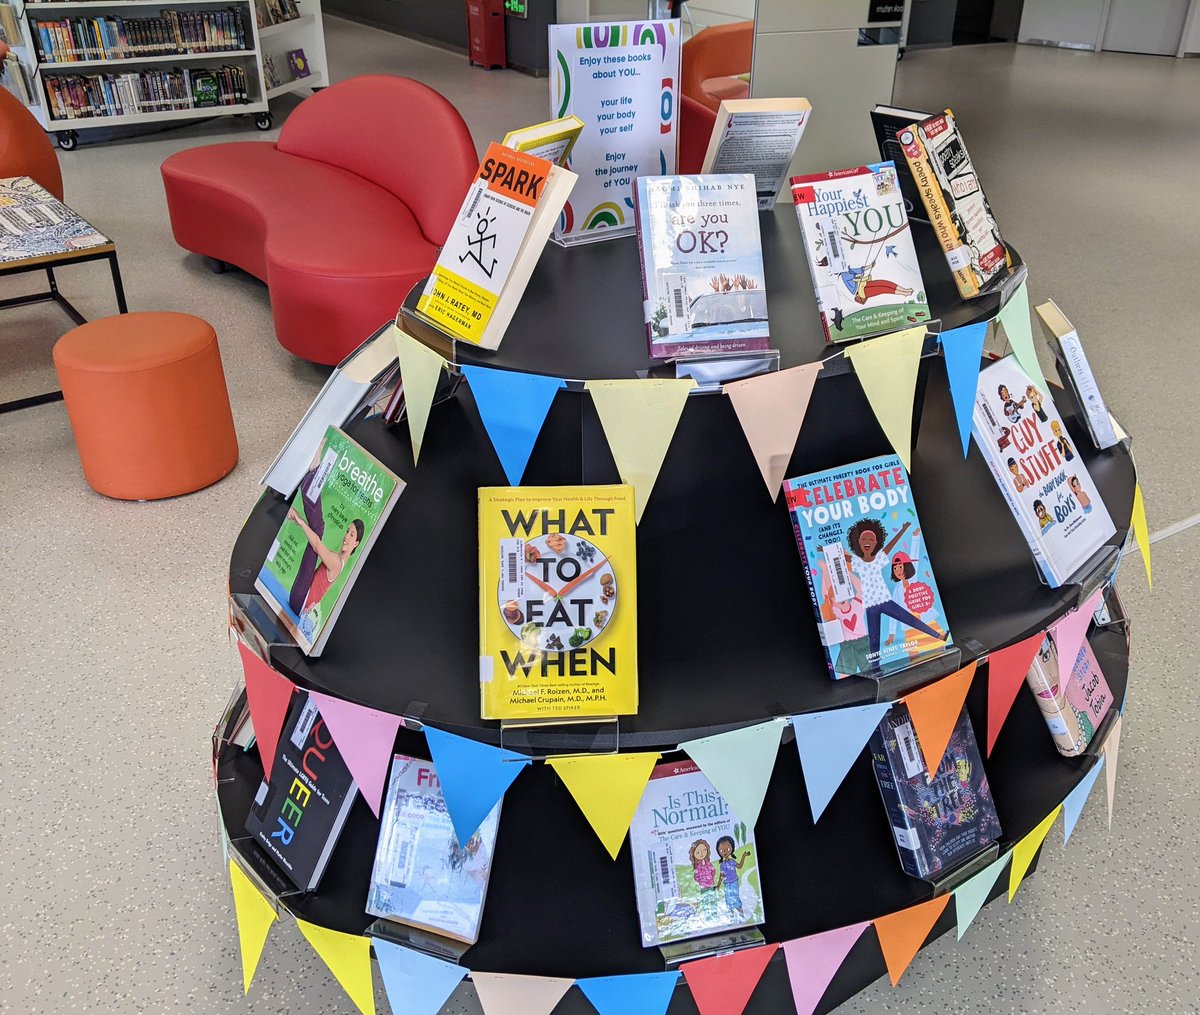 New #LibraryDisplay 'Happy YOU Year' with books for teens and middlers about their choices, their emotions, their bodies.